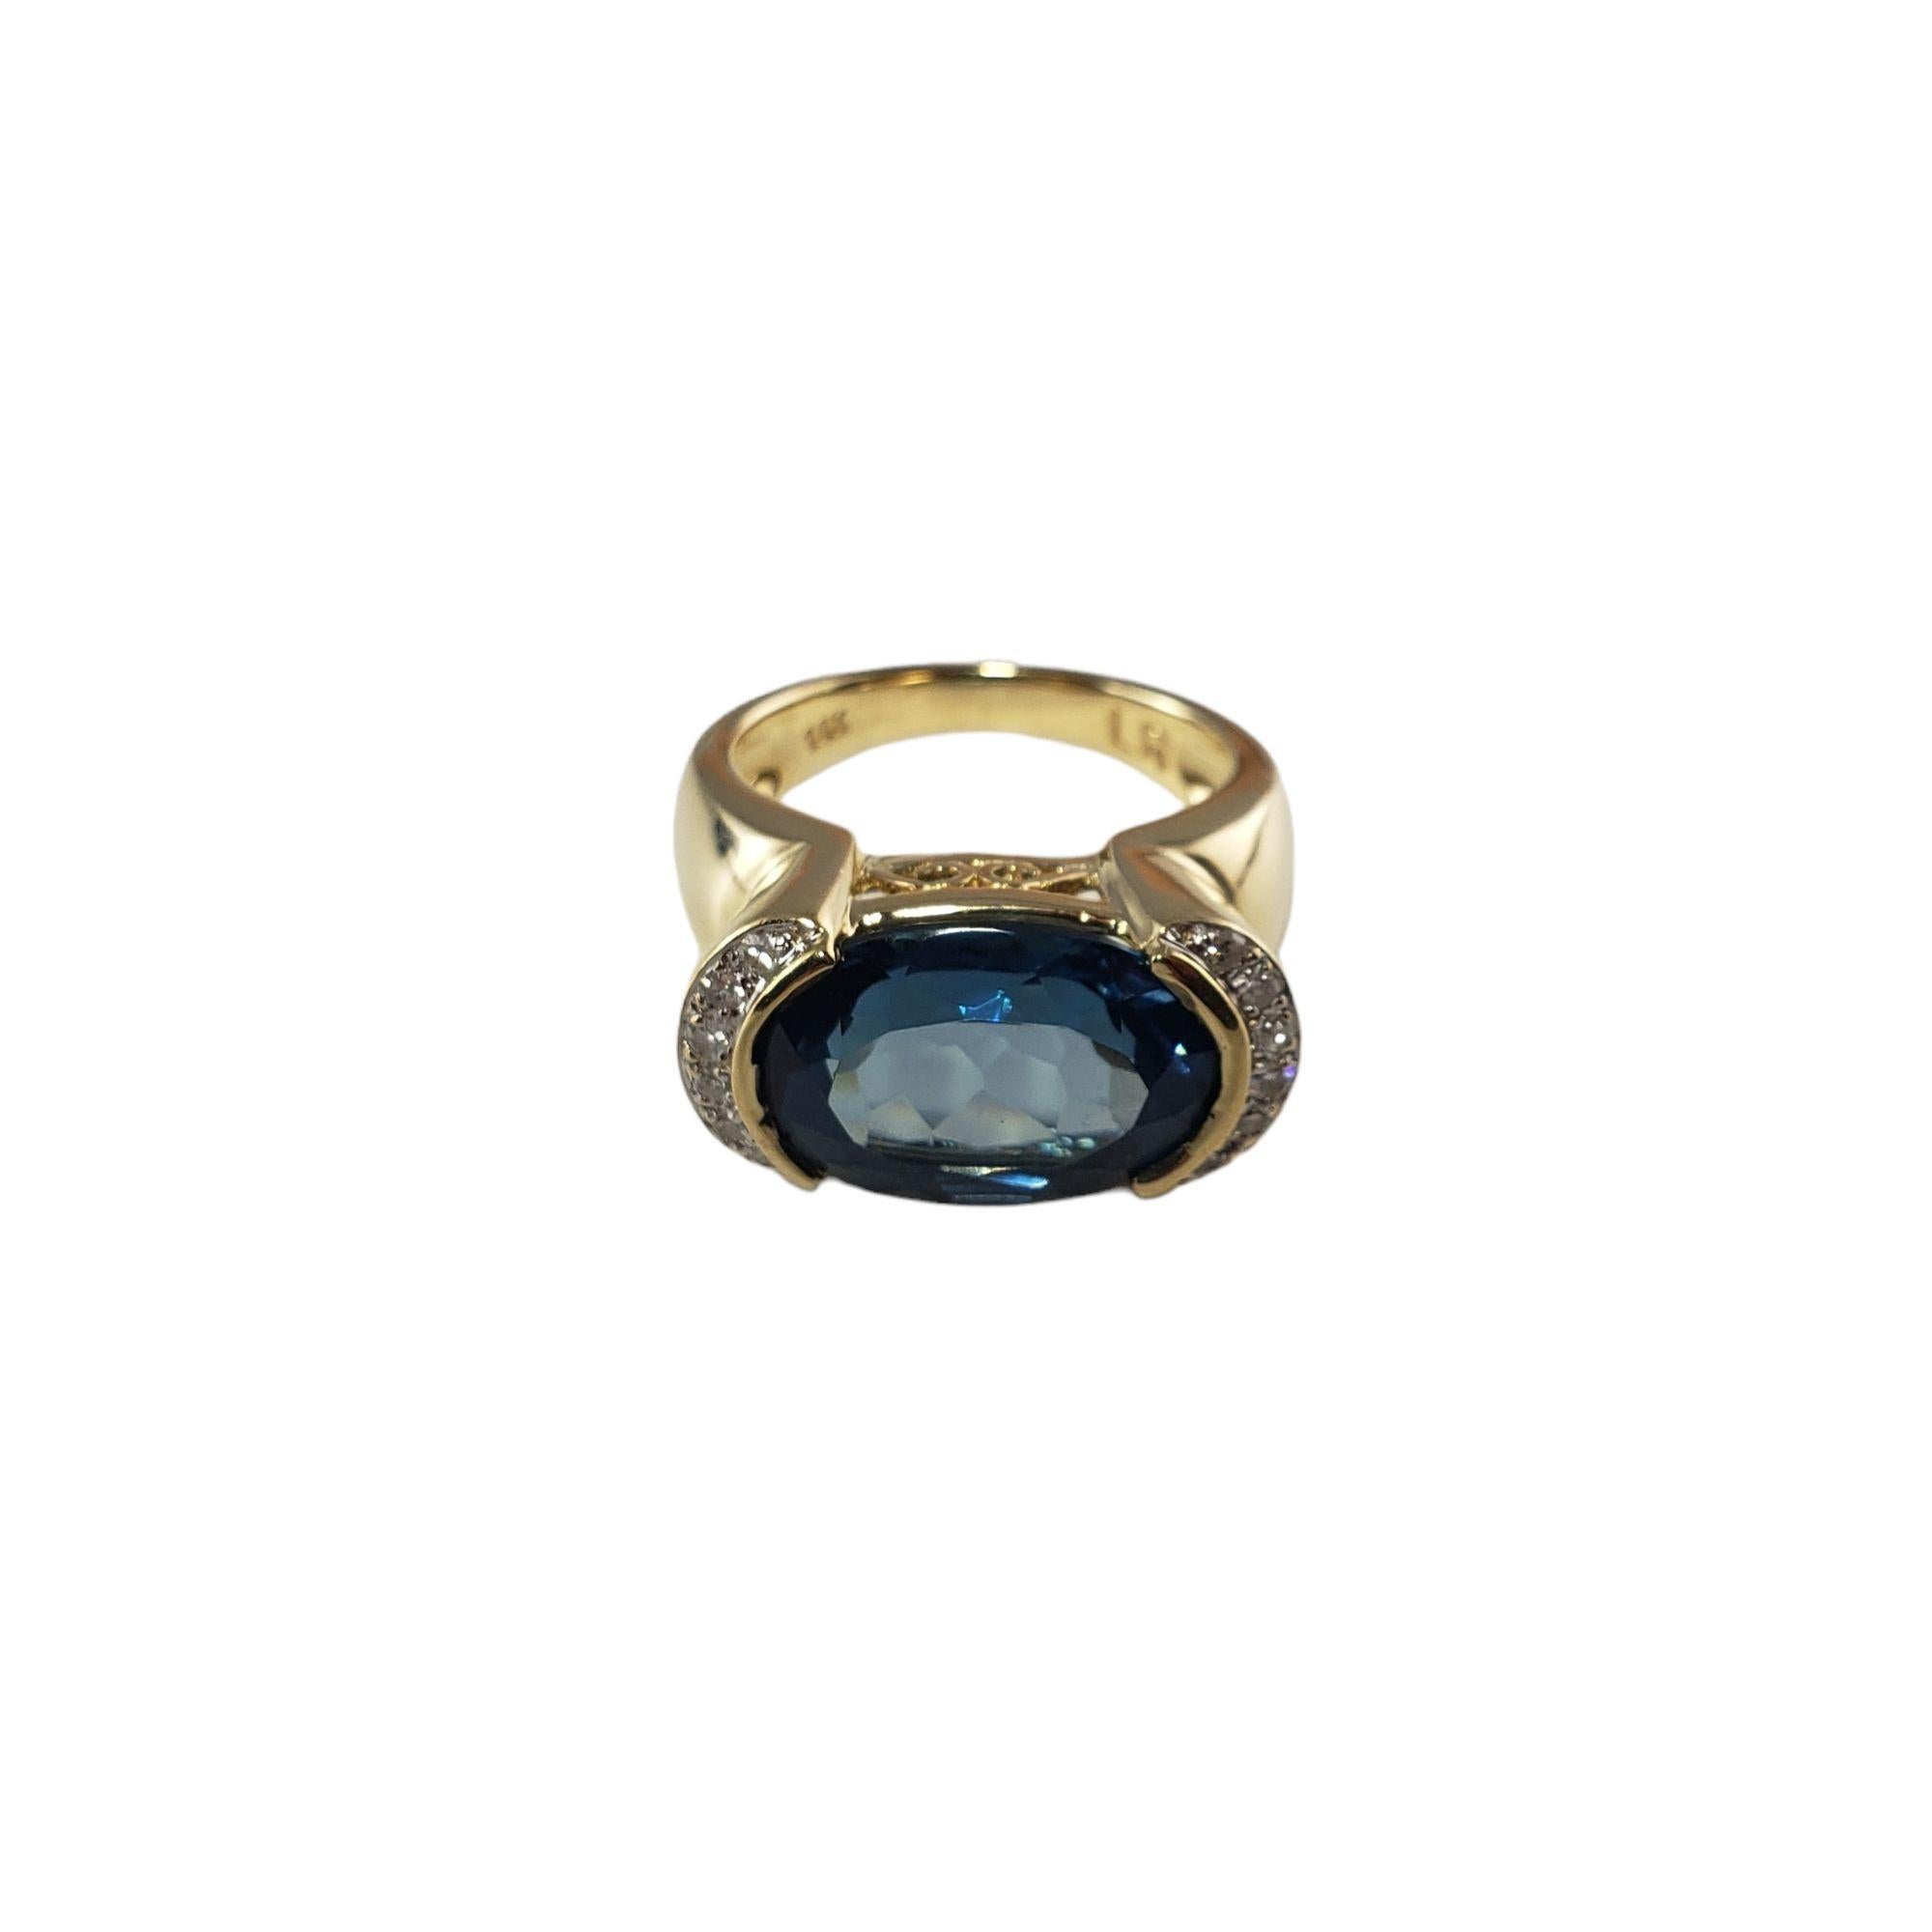 This stunning ring features one east/west set oval blue topaz (14 mm x 10 mm) and 12 round single cut diamonds set in classic 14K yellow gold.

Width:  10 mm.  Shank:  2 mm.

Topaz weight:  7.50 ct.

Total diamond weight:  .13 ct.

Diamond color: